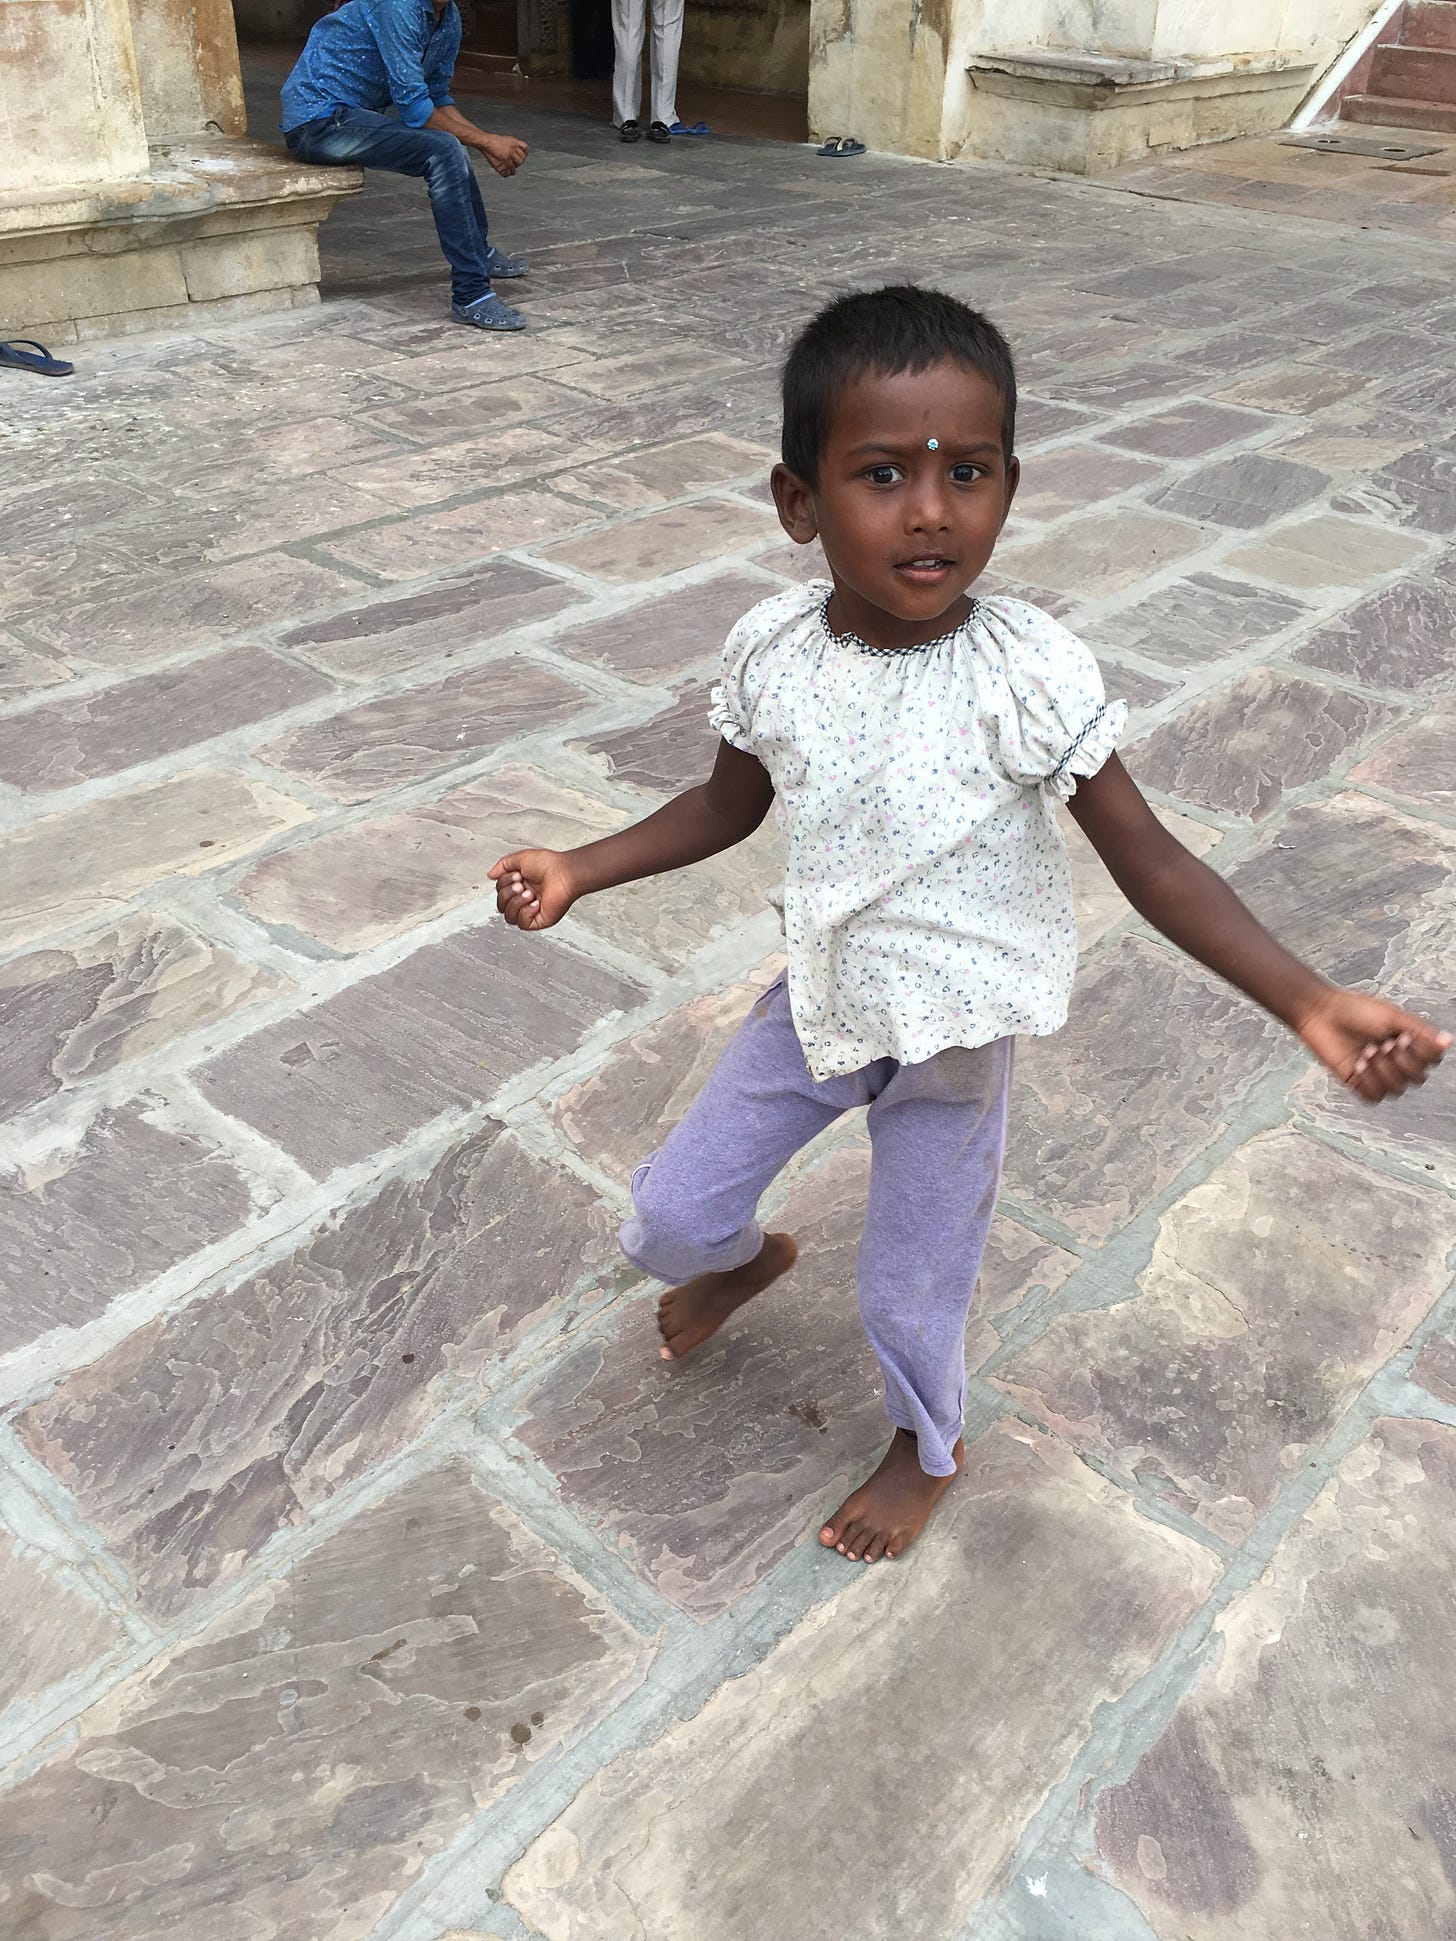 A three-year-old girl twirls in a stone and marble courtyard. She has very short black hair, dark brown skin, and dark eyes. She wears a white shirt and purple pants, looking off into the distance.